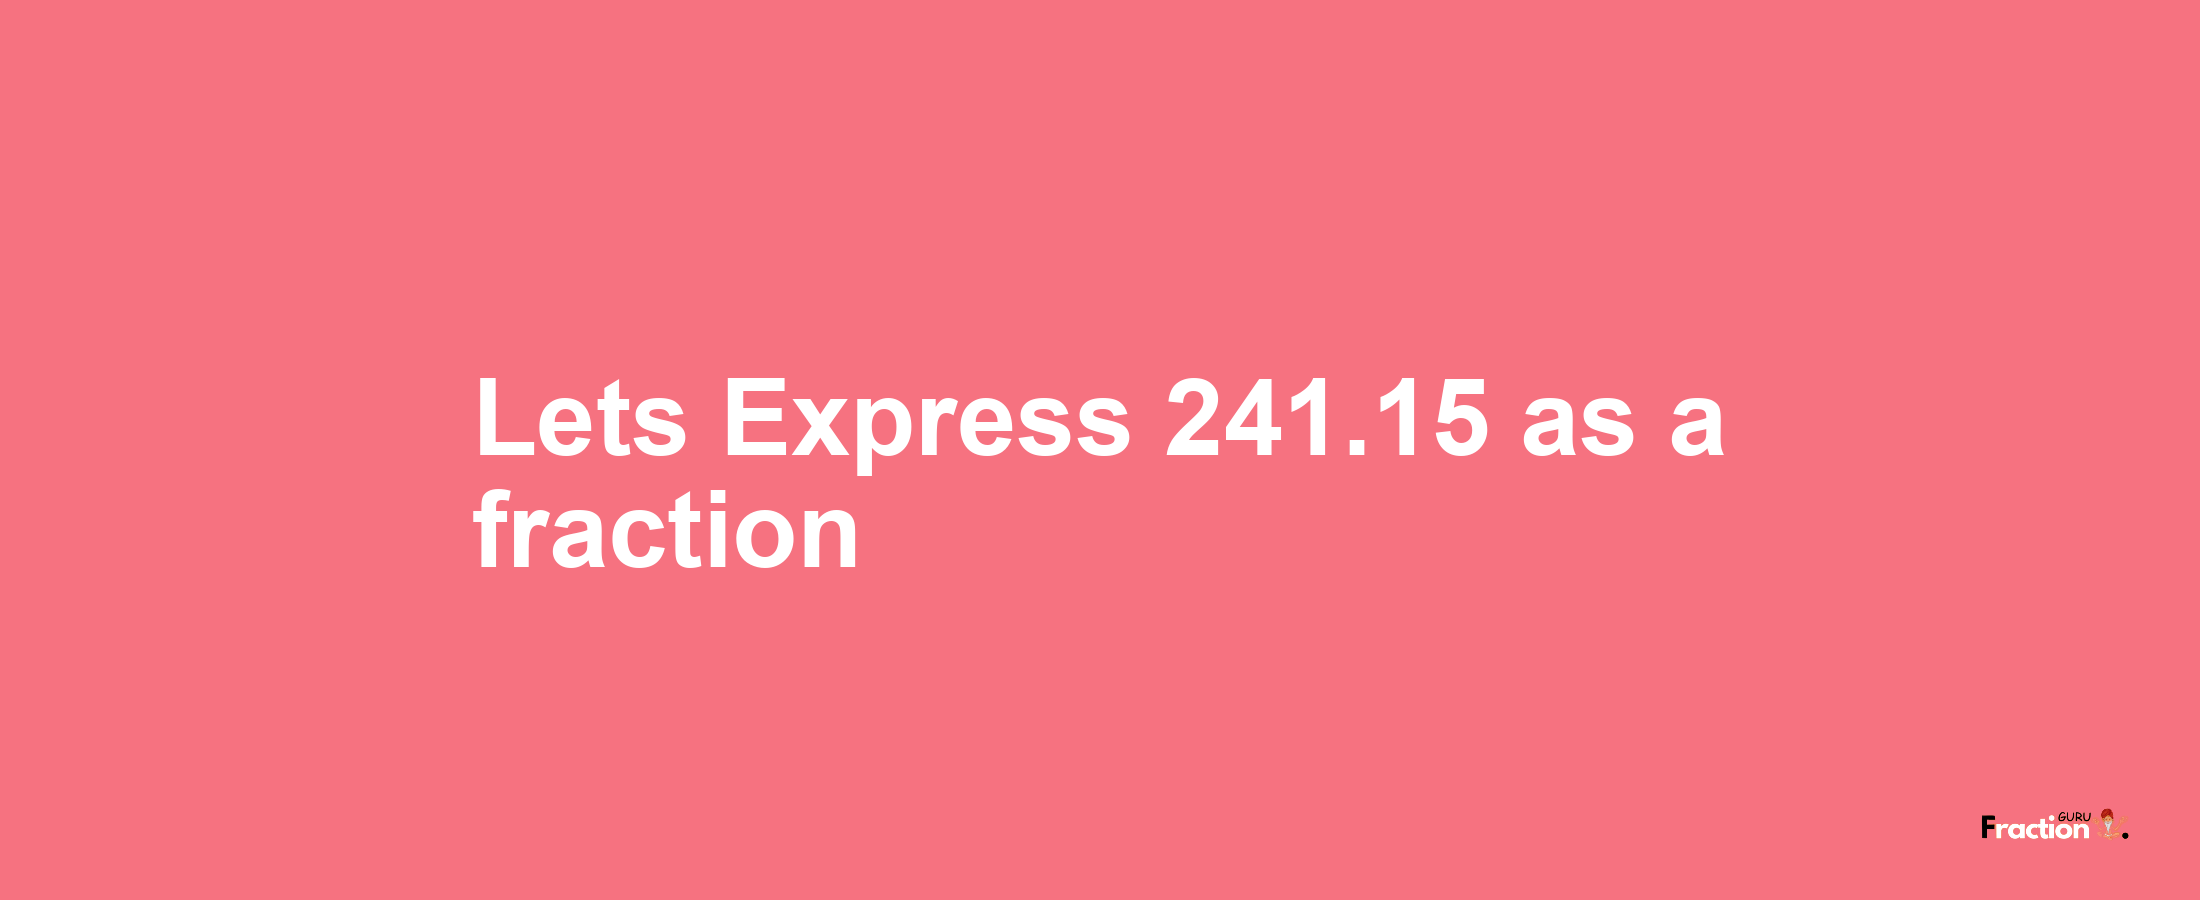 Lets Express 241.15 as afraction